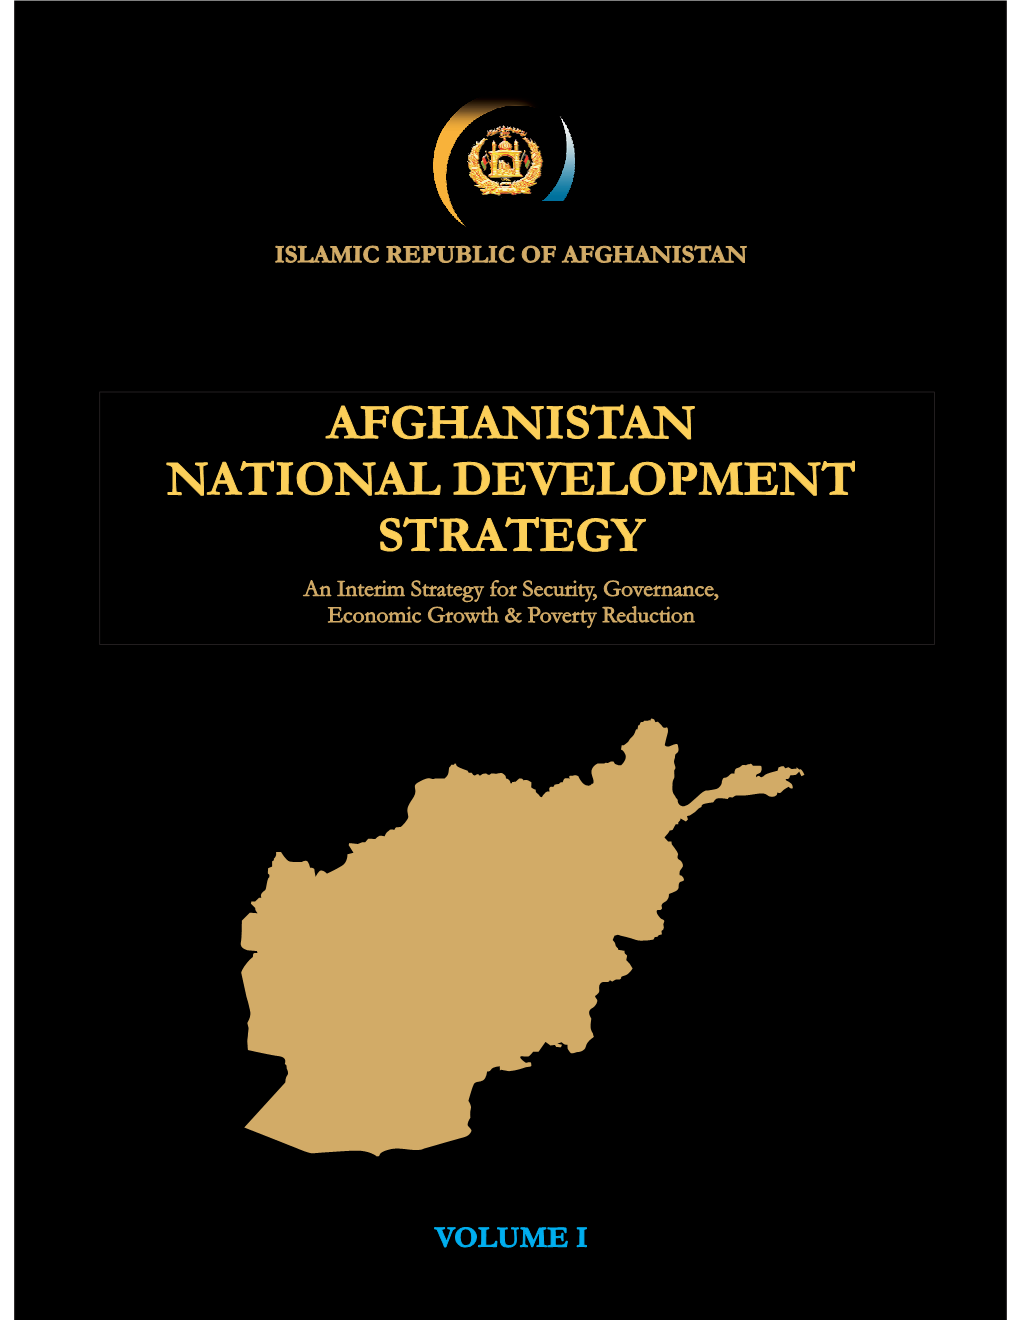 AFGHANISTAN NATIONAL DEVELOPMENT STRATEGY an Interim Strategy for Security, Governance, Economic Growth & Poverty Reduction